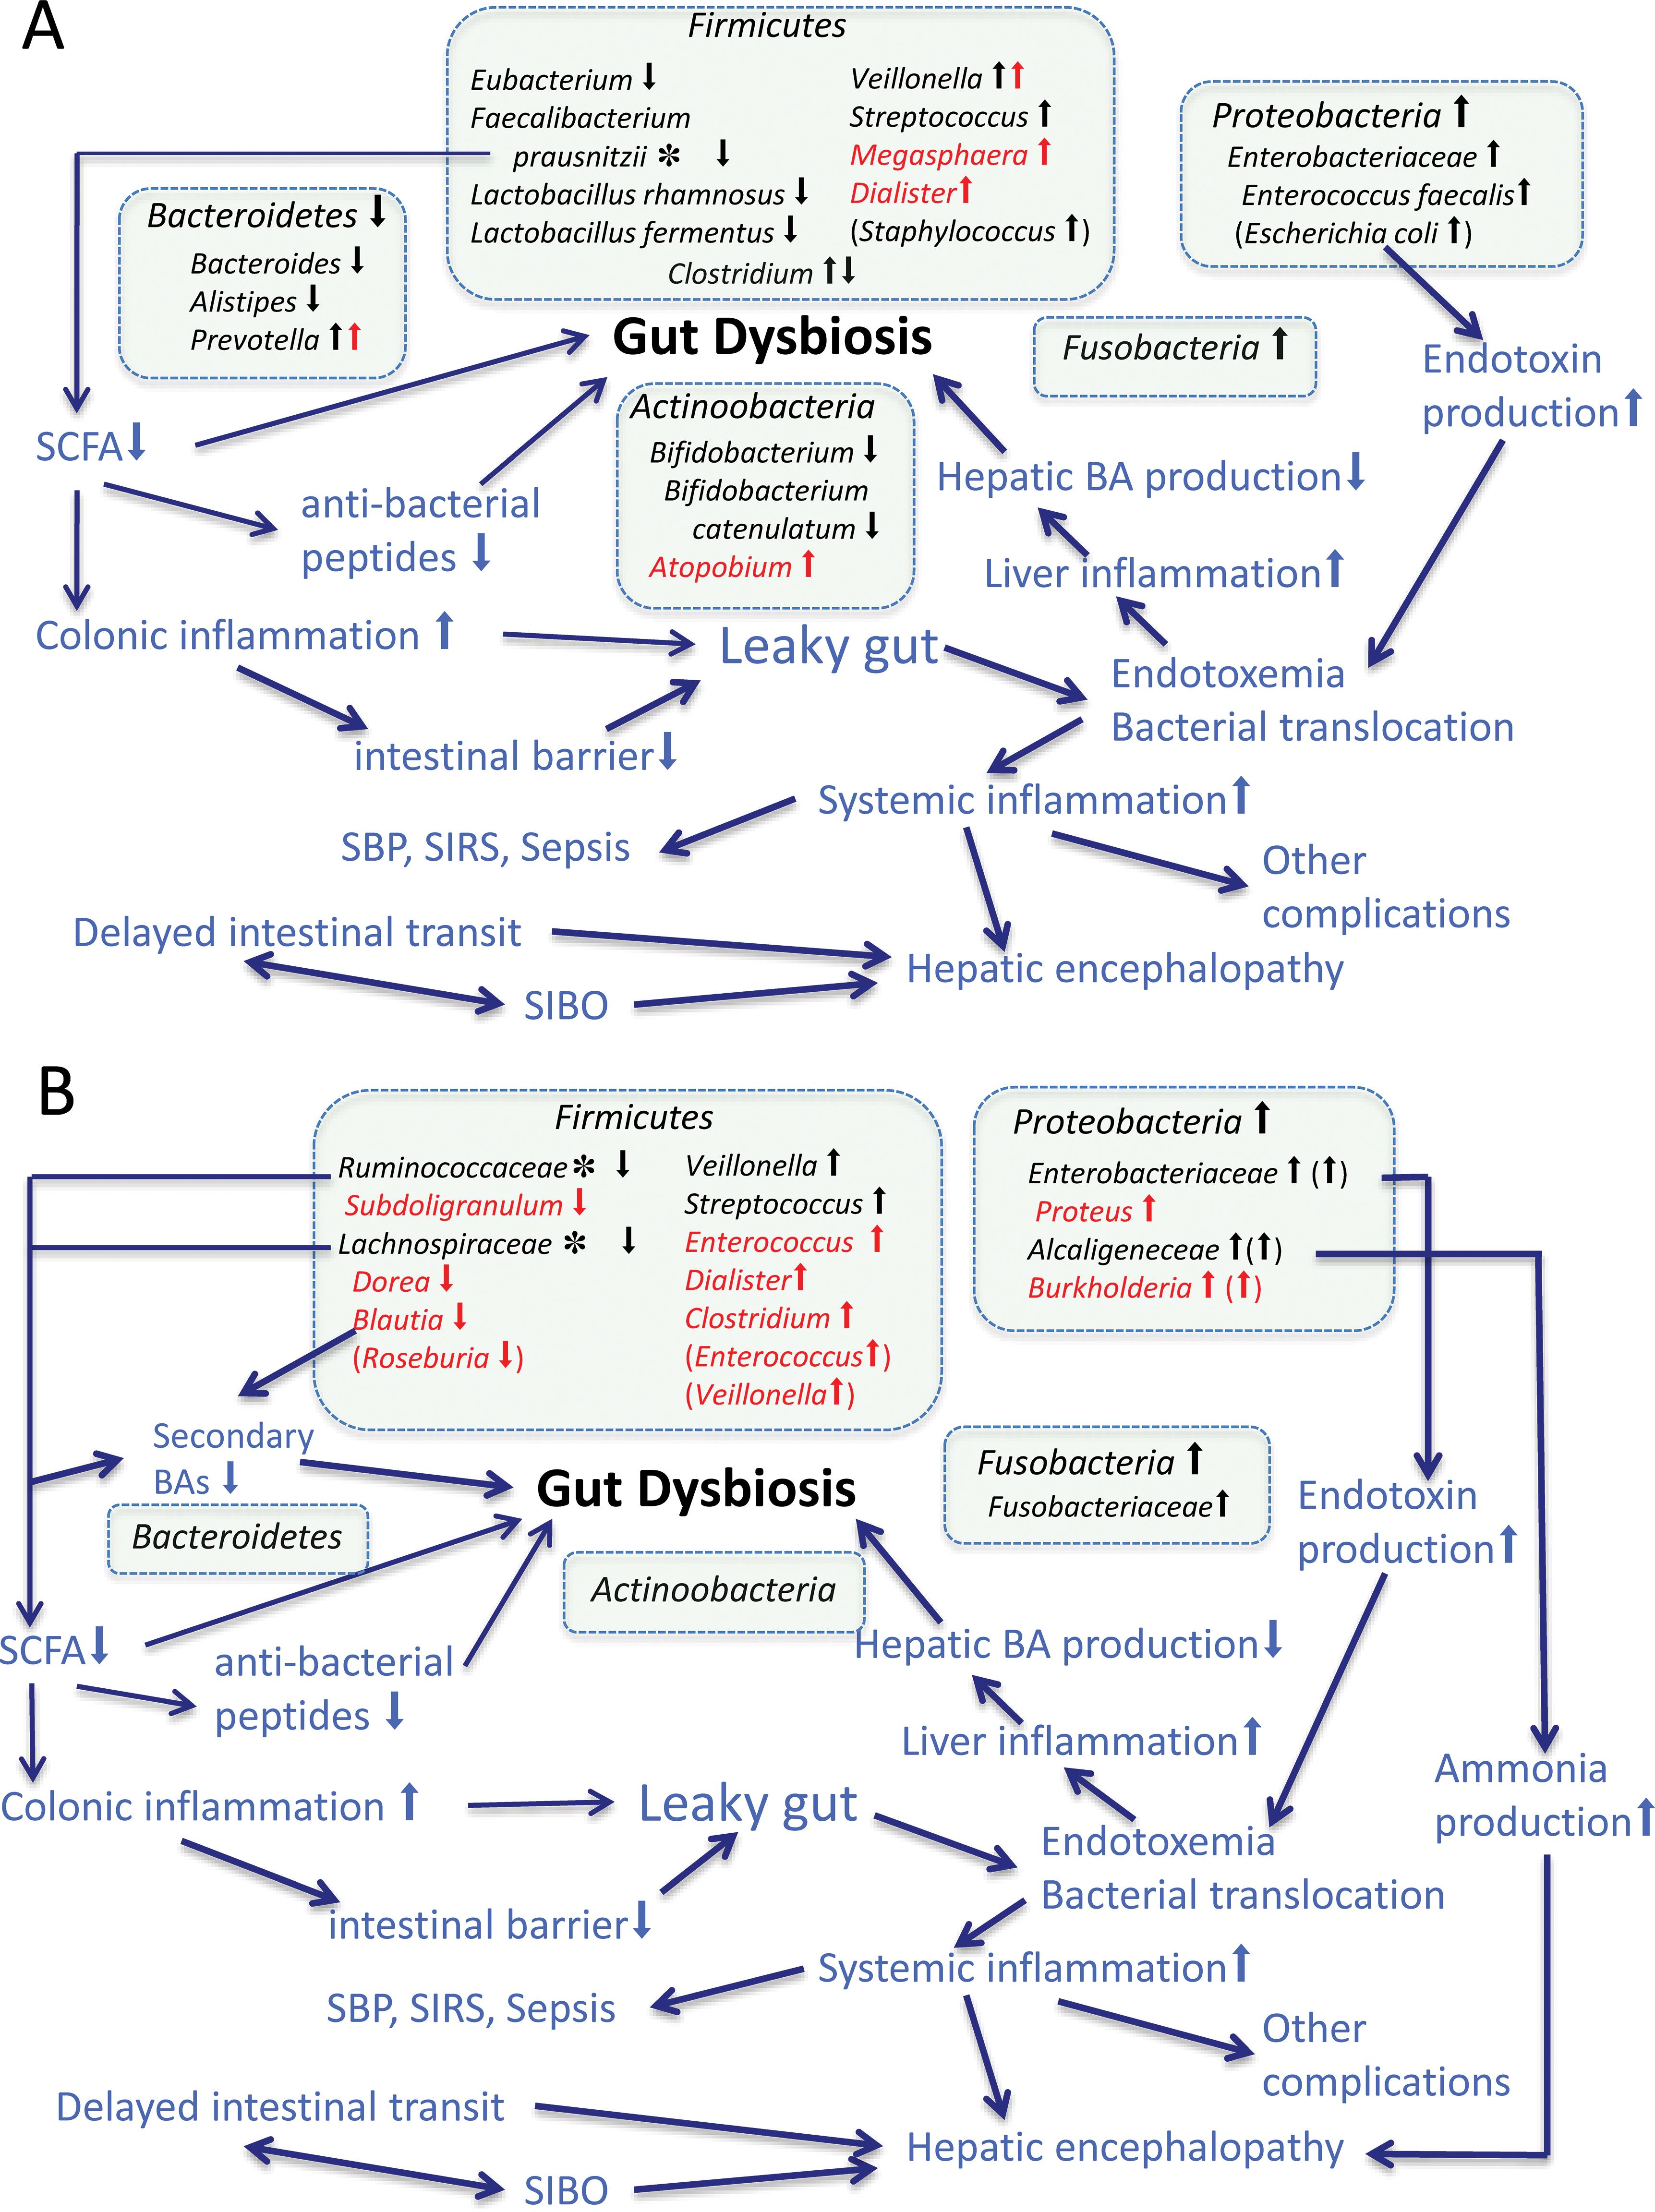 Changes in intestinal microbiota and the possible relations to intestinal dysfunction, bacterial translocation, and cirrhotic complications in cirrhosis.